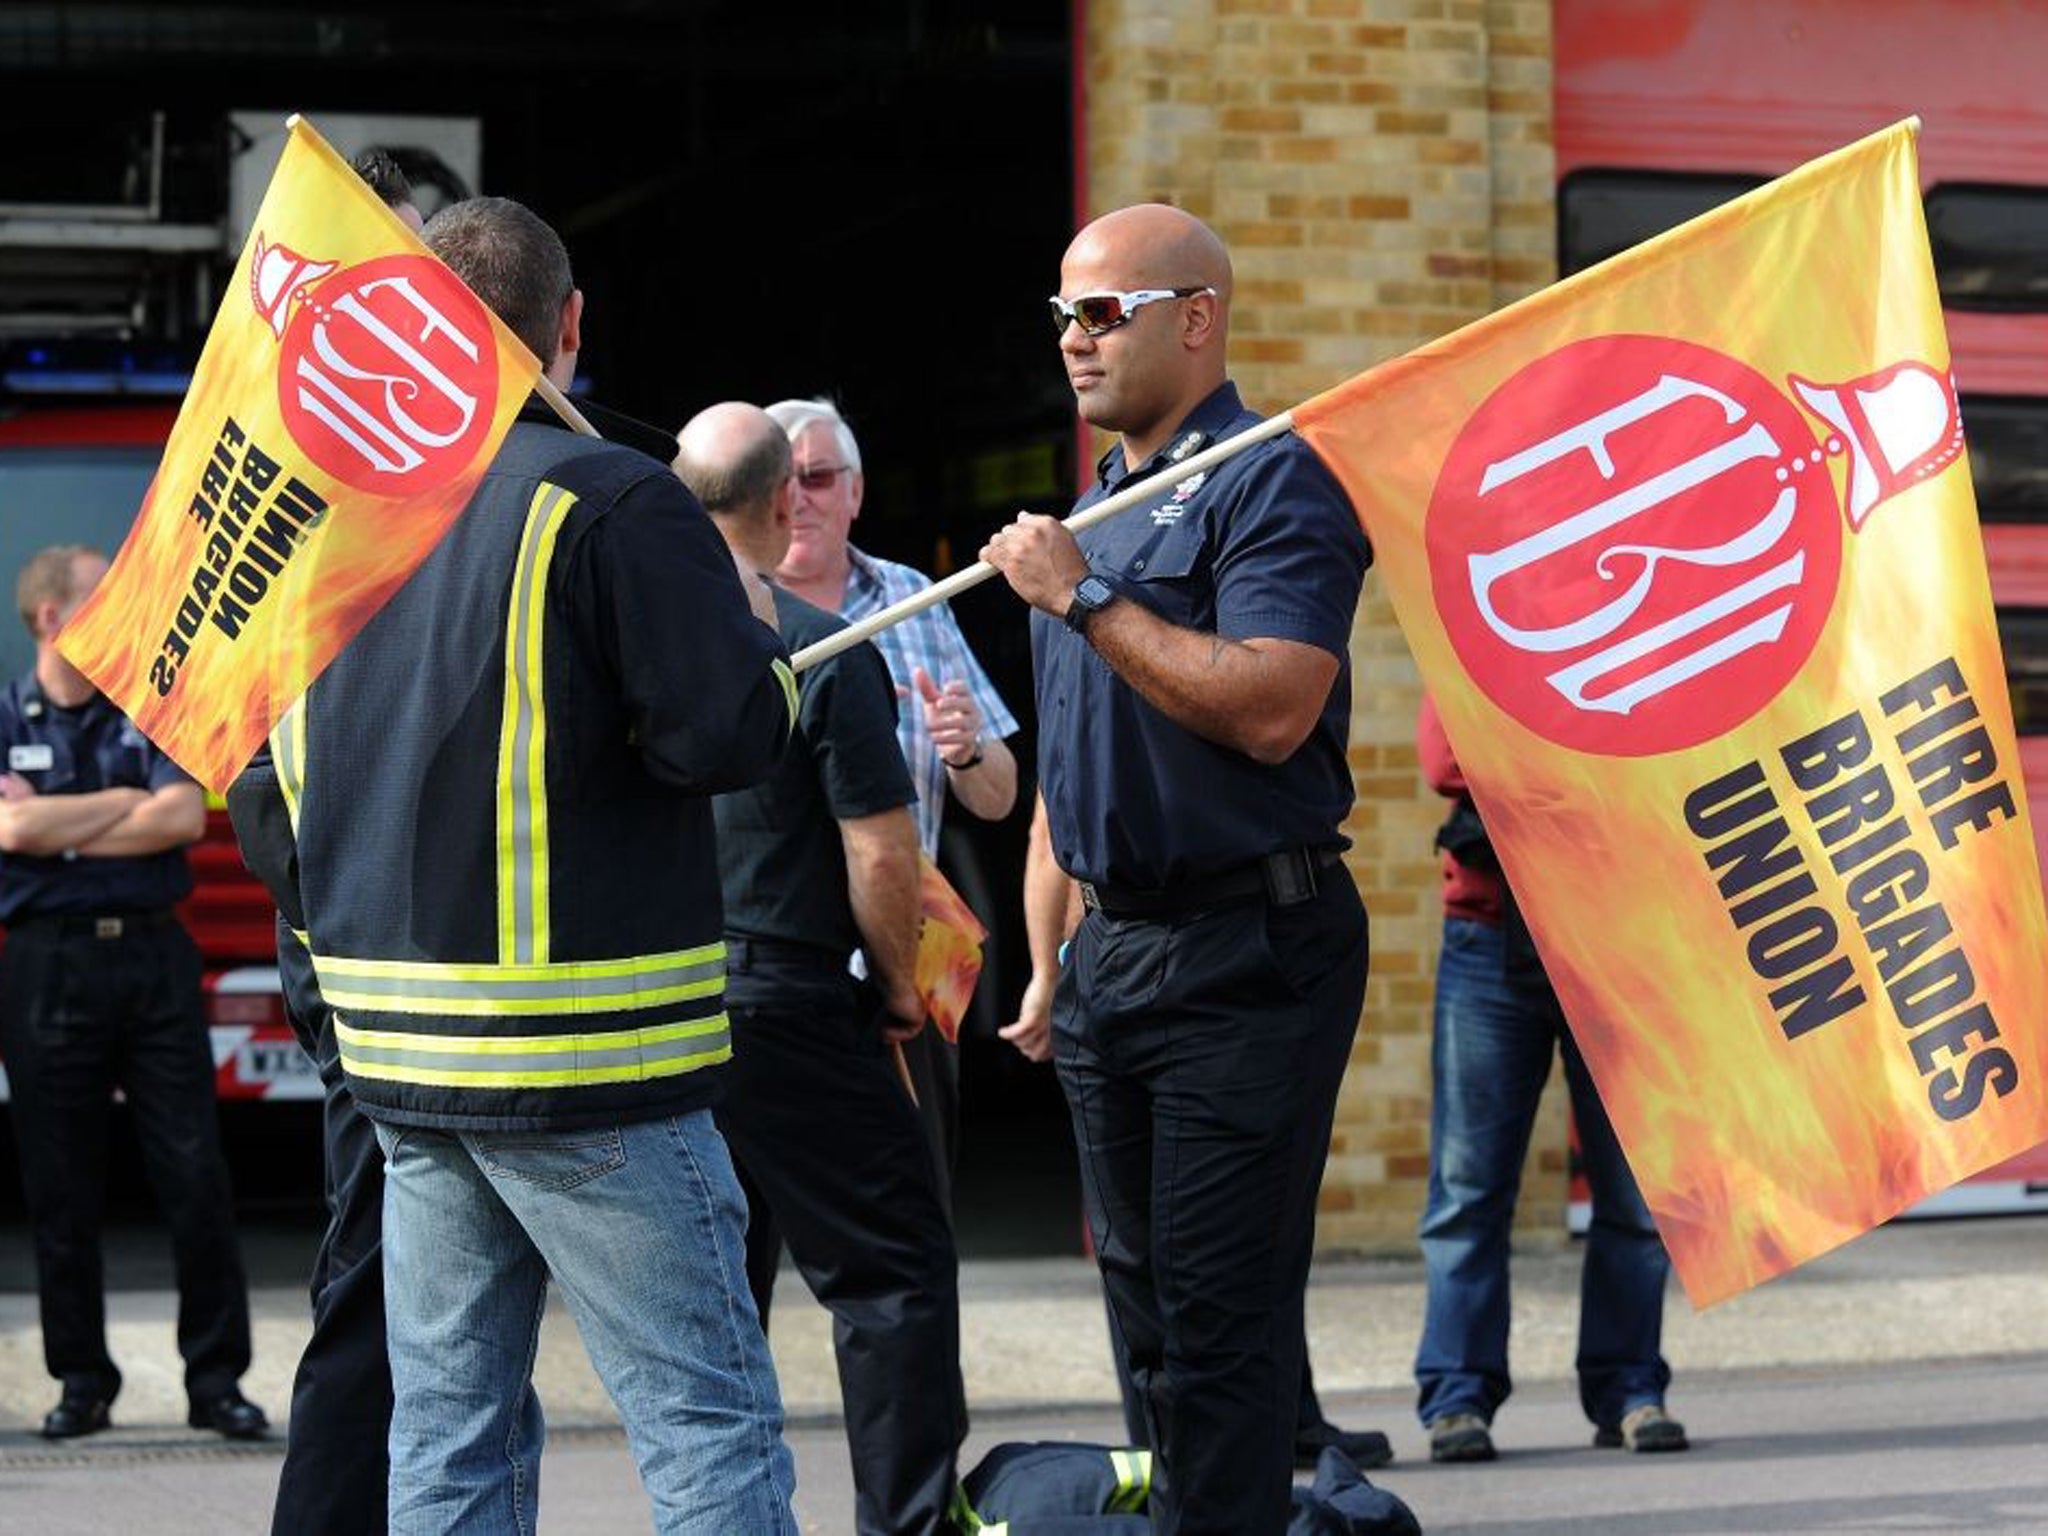 Firefighters and Fire Service staff from Wiltshire gather on the picket line outside